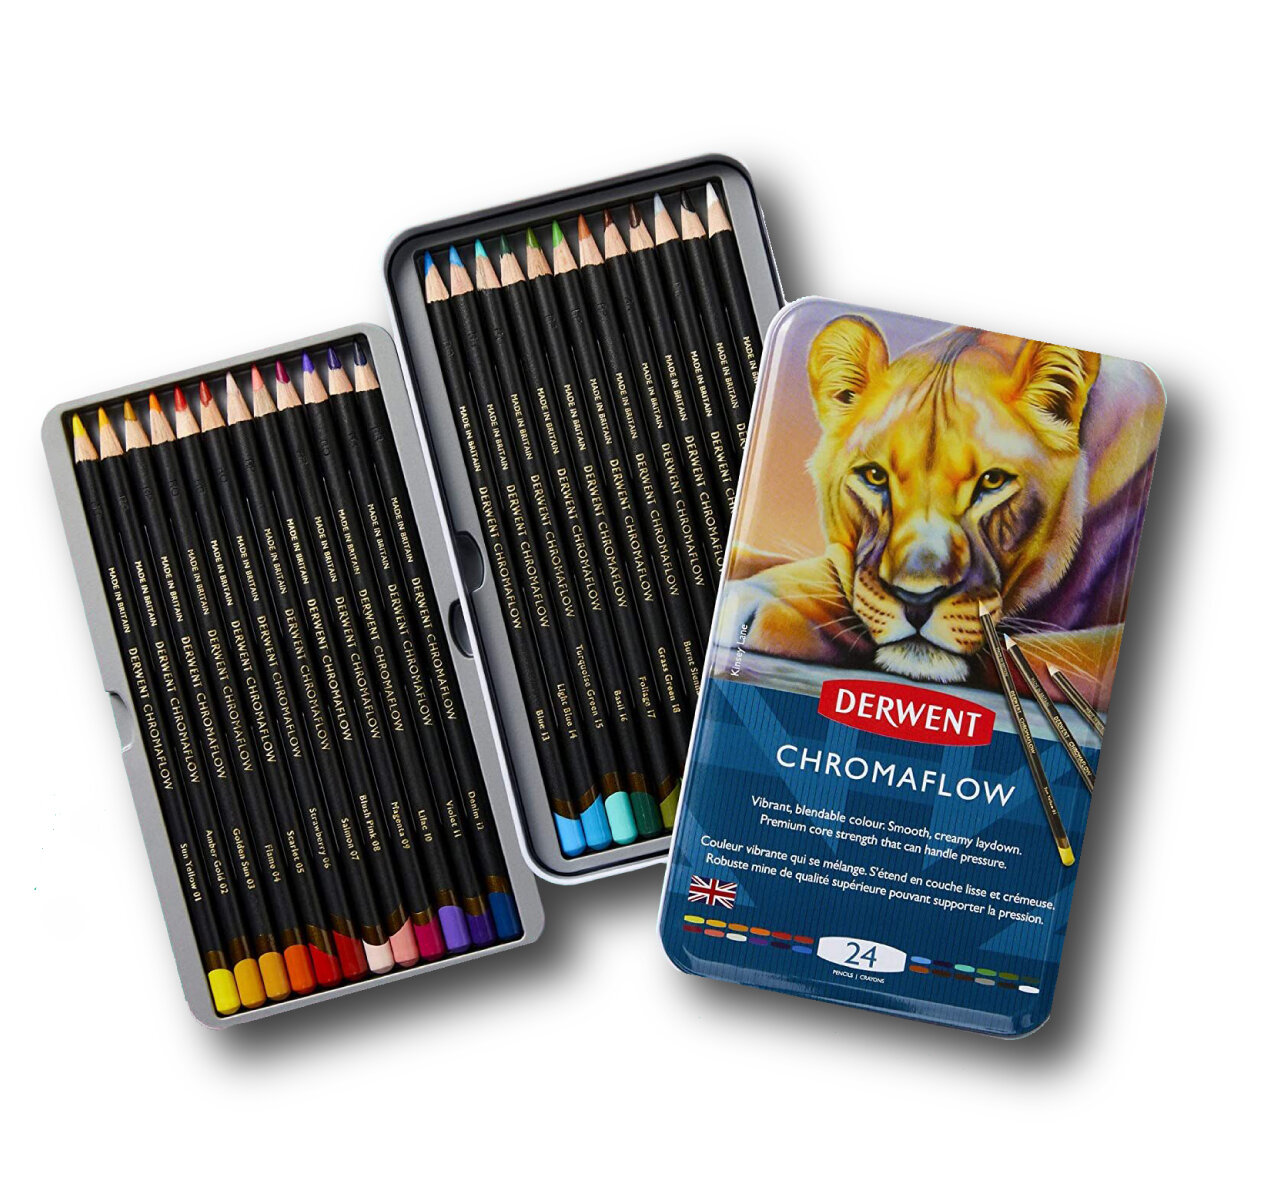 Master 150 Colored Pencil Mega Tin Set with Premium Soft Thick Core Vibrant Color Leads with 2 Packs 9 x 12 Sketch Pads Drawing Paper - Artist Art